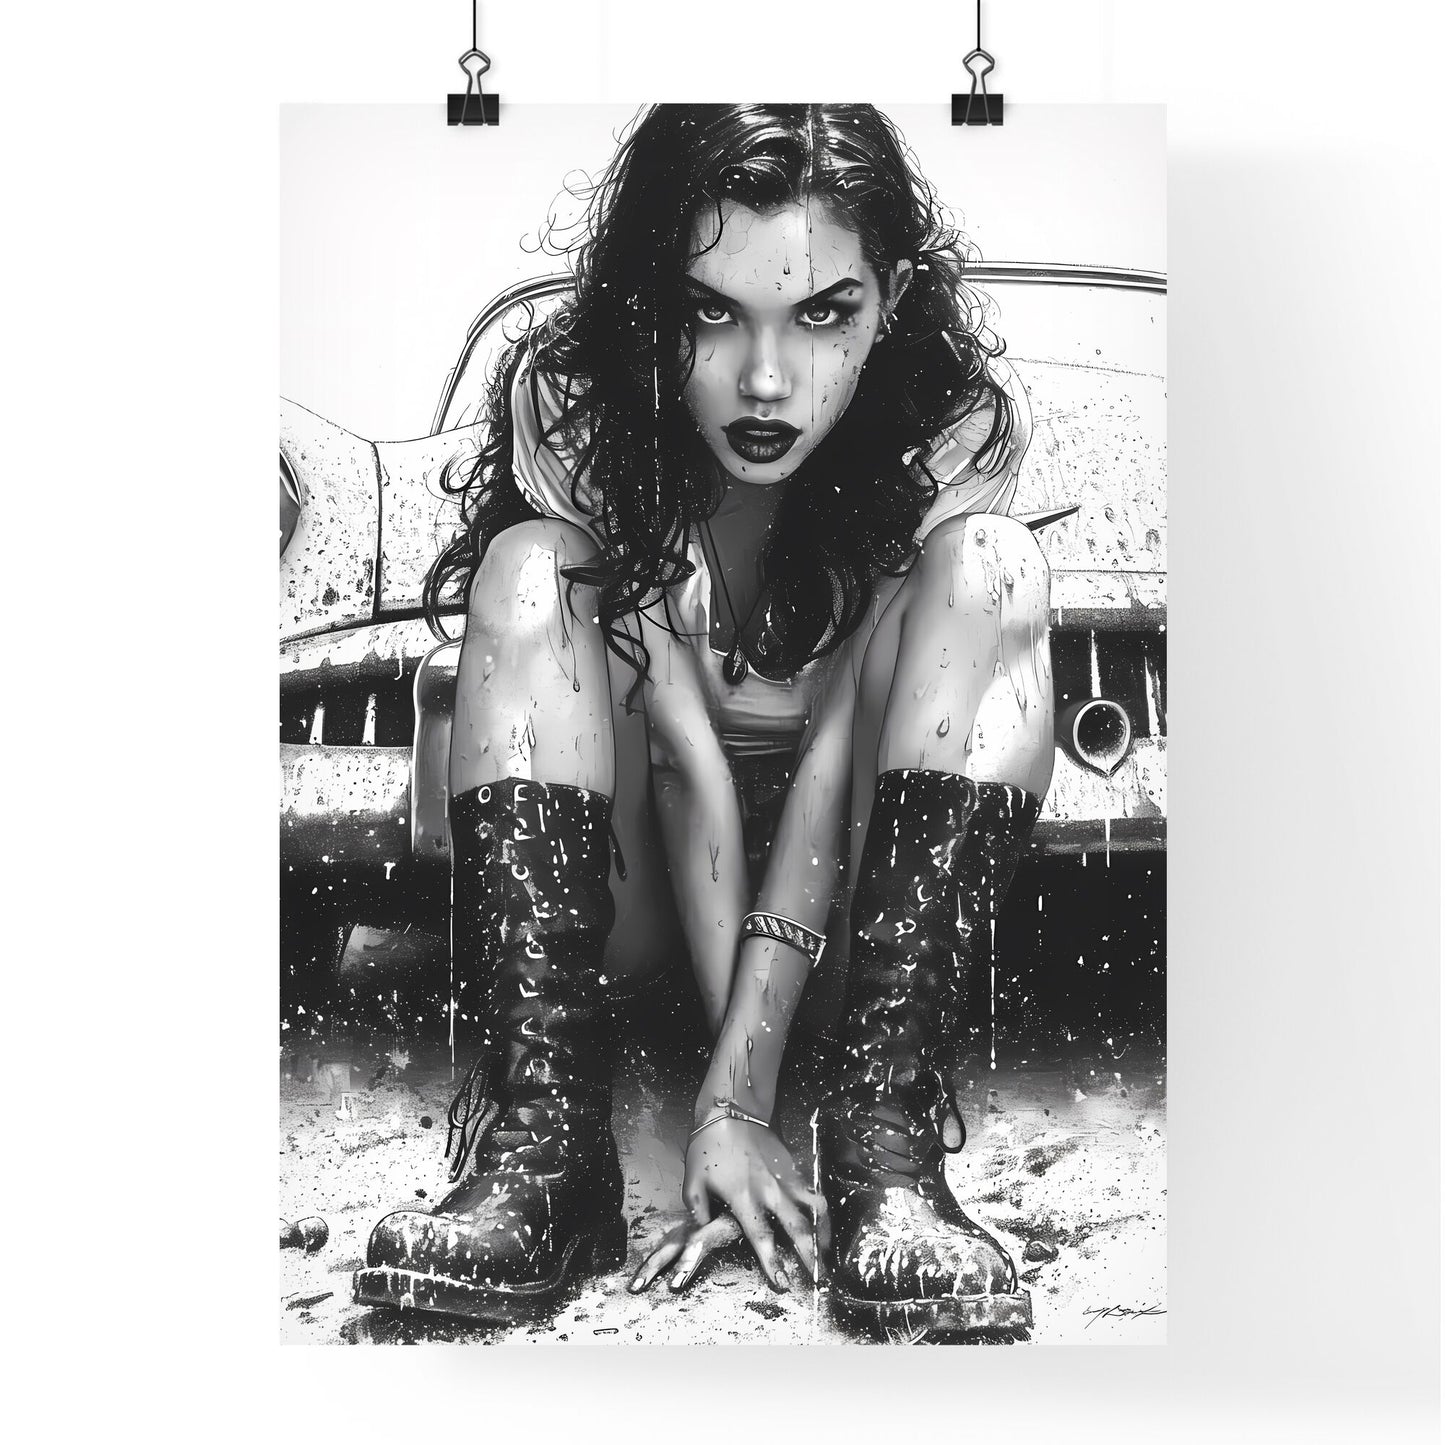 The vintage pin up girl - Art print of a woman sitting on the ground in the rain Default Title